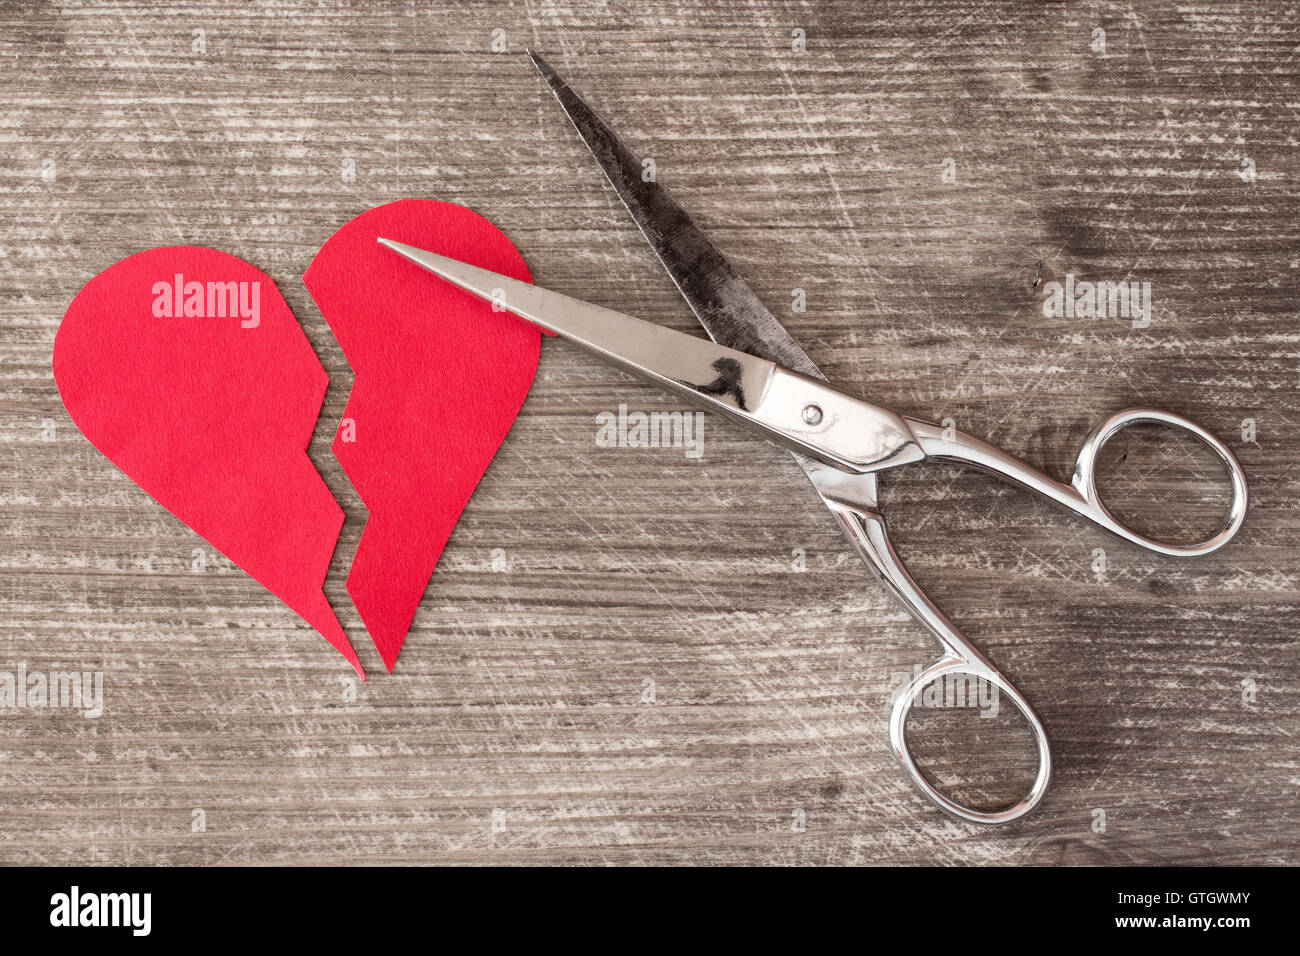 Broken red heart and scissors on a wooden background Stock Photo